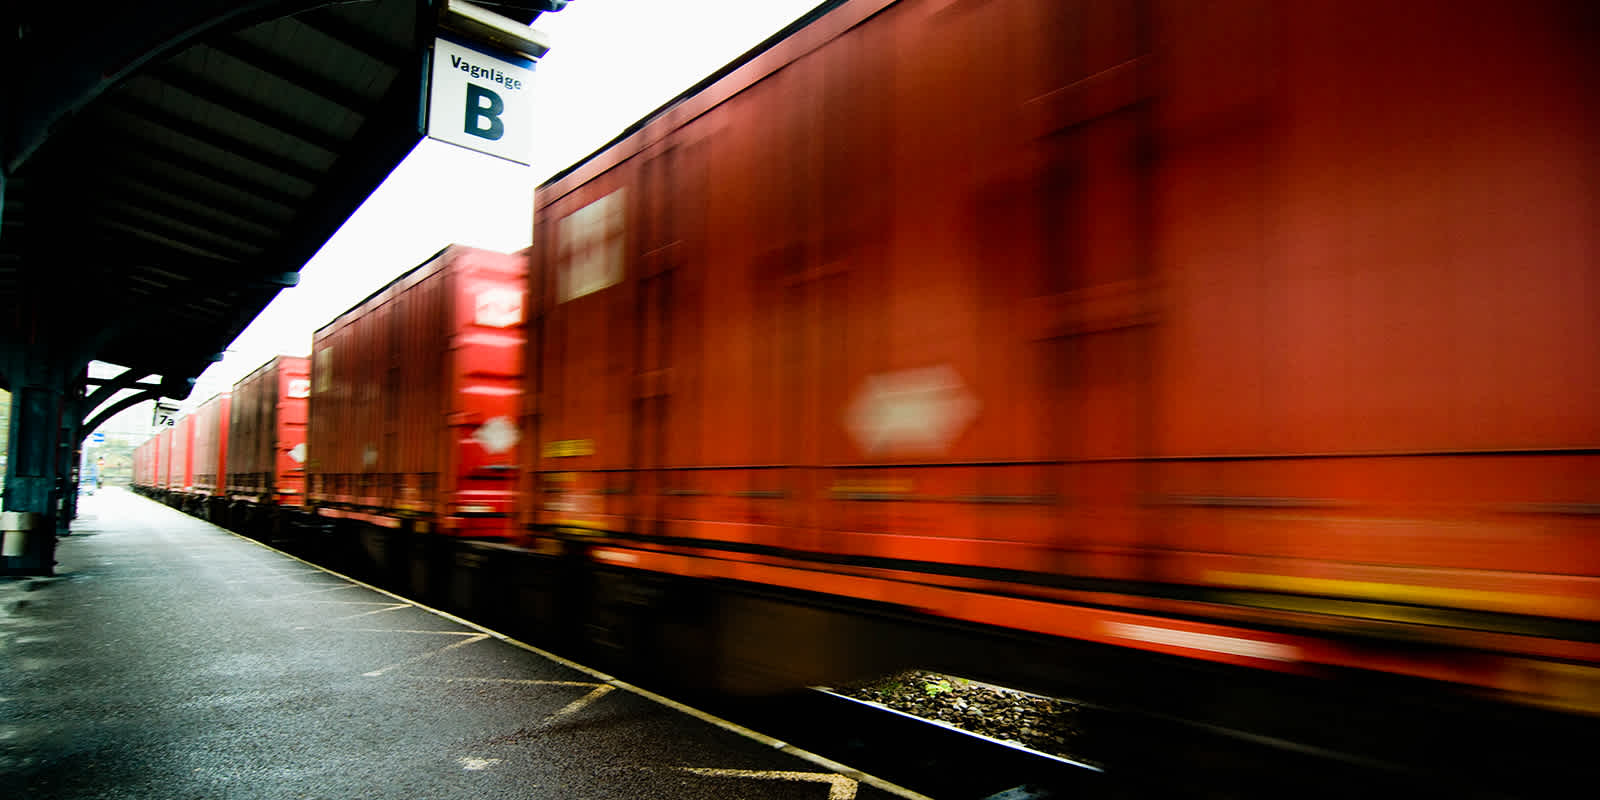 Image of containers on rail passing through a station